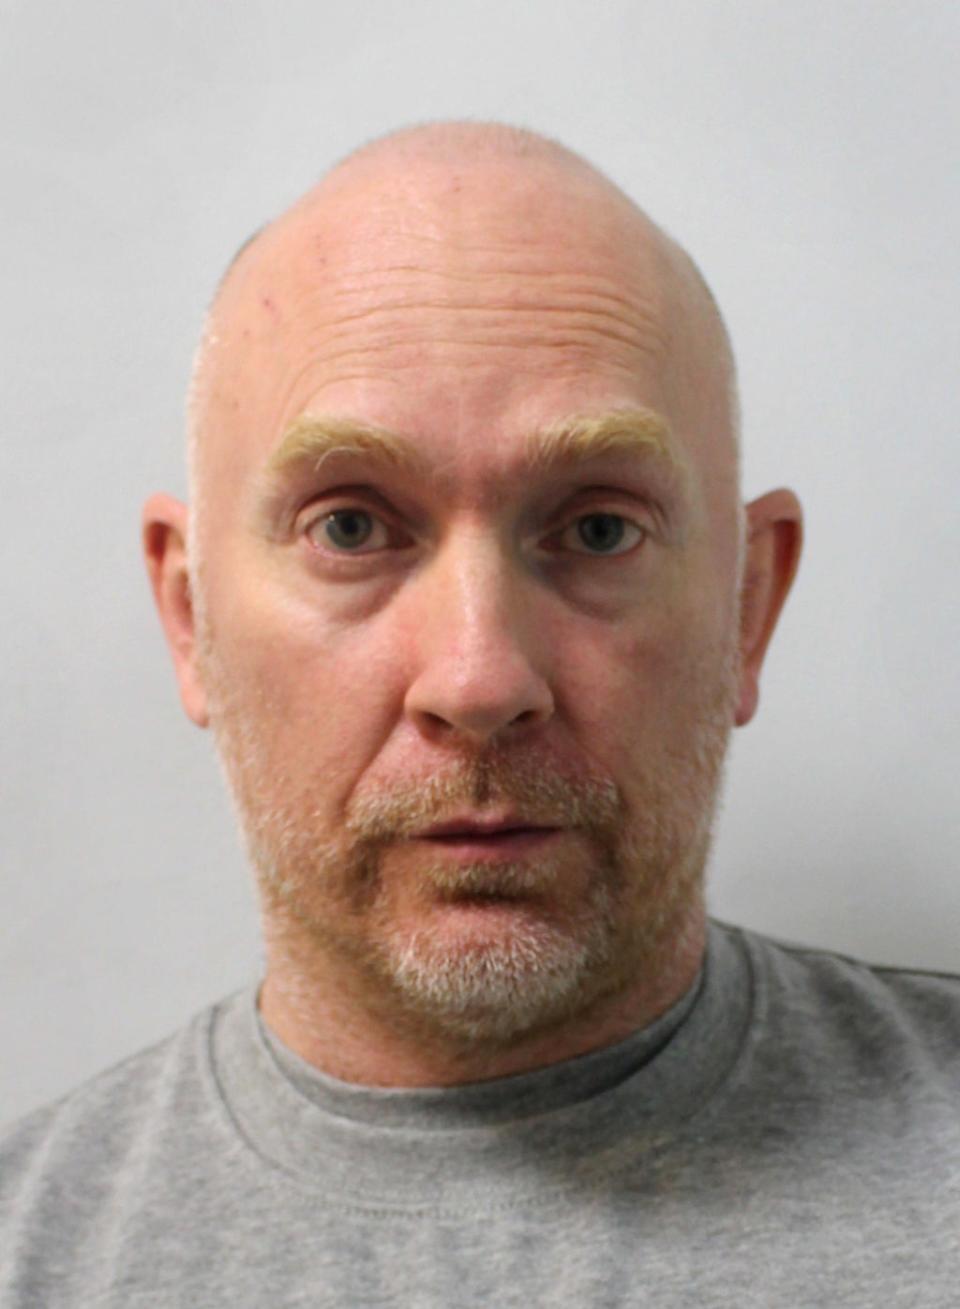 Wayne Couzens was handed a whole life term when he was sentenced for Sarah Everard’s murder in September (Metropolitan Police/PA) (PA Media)